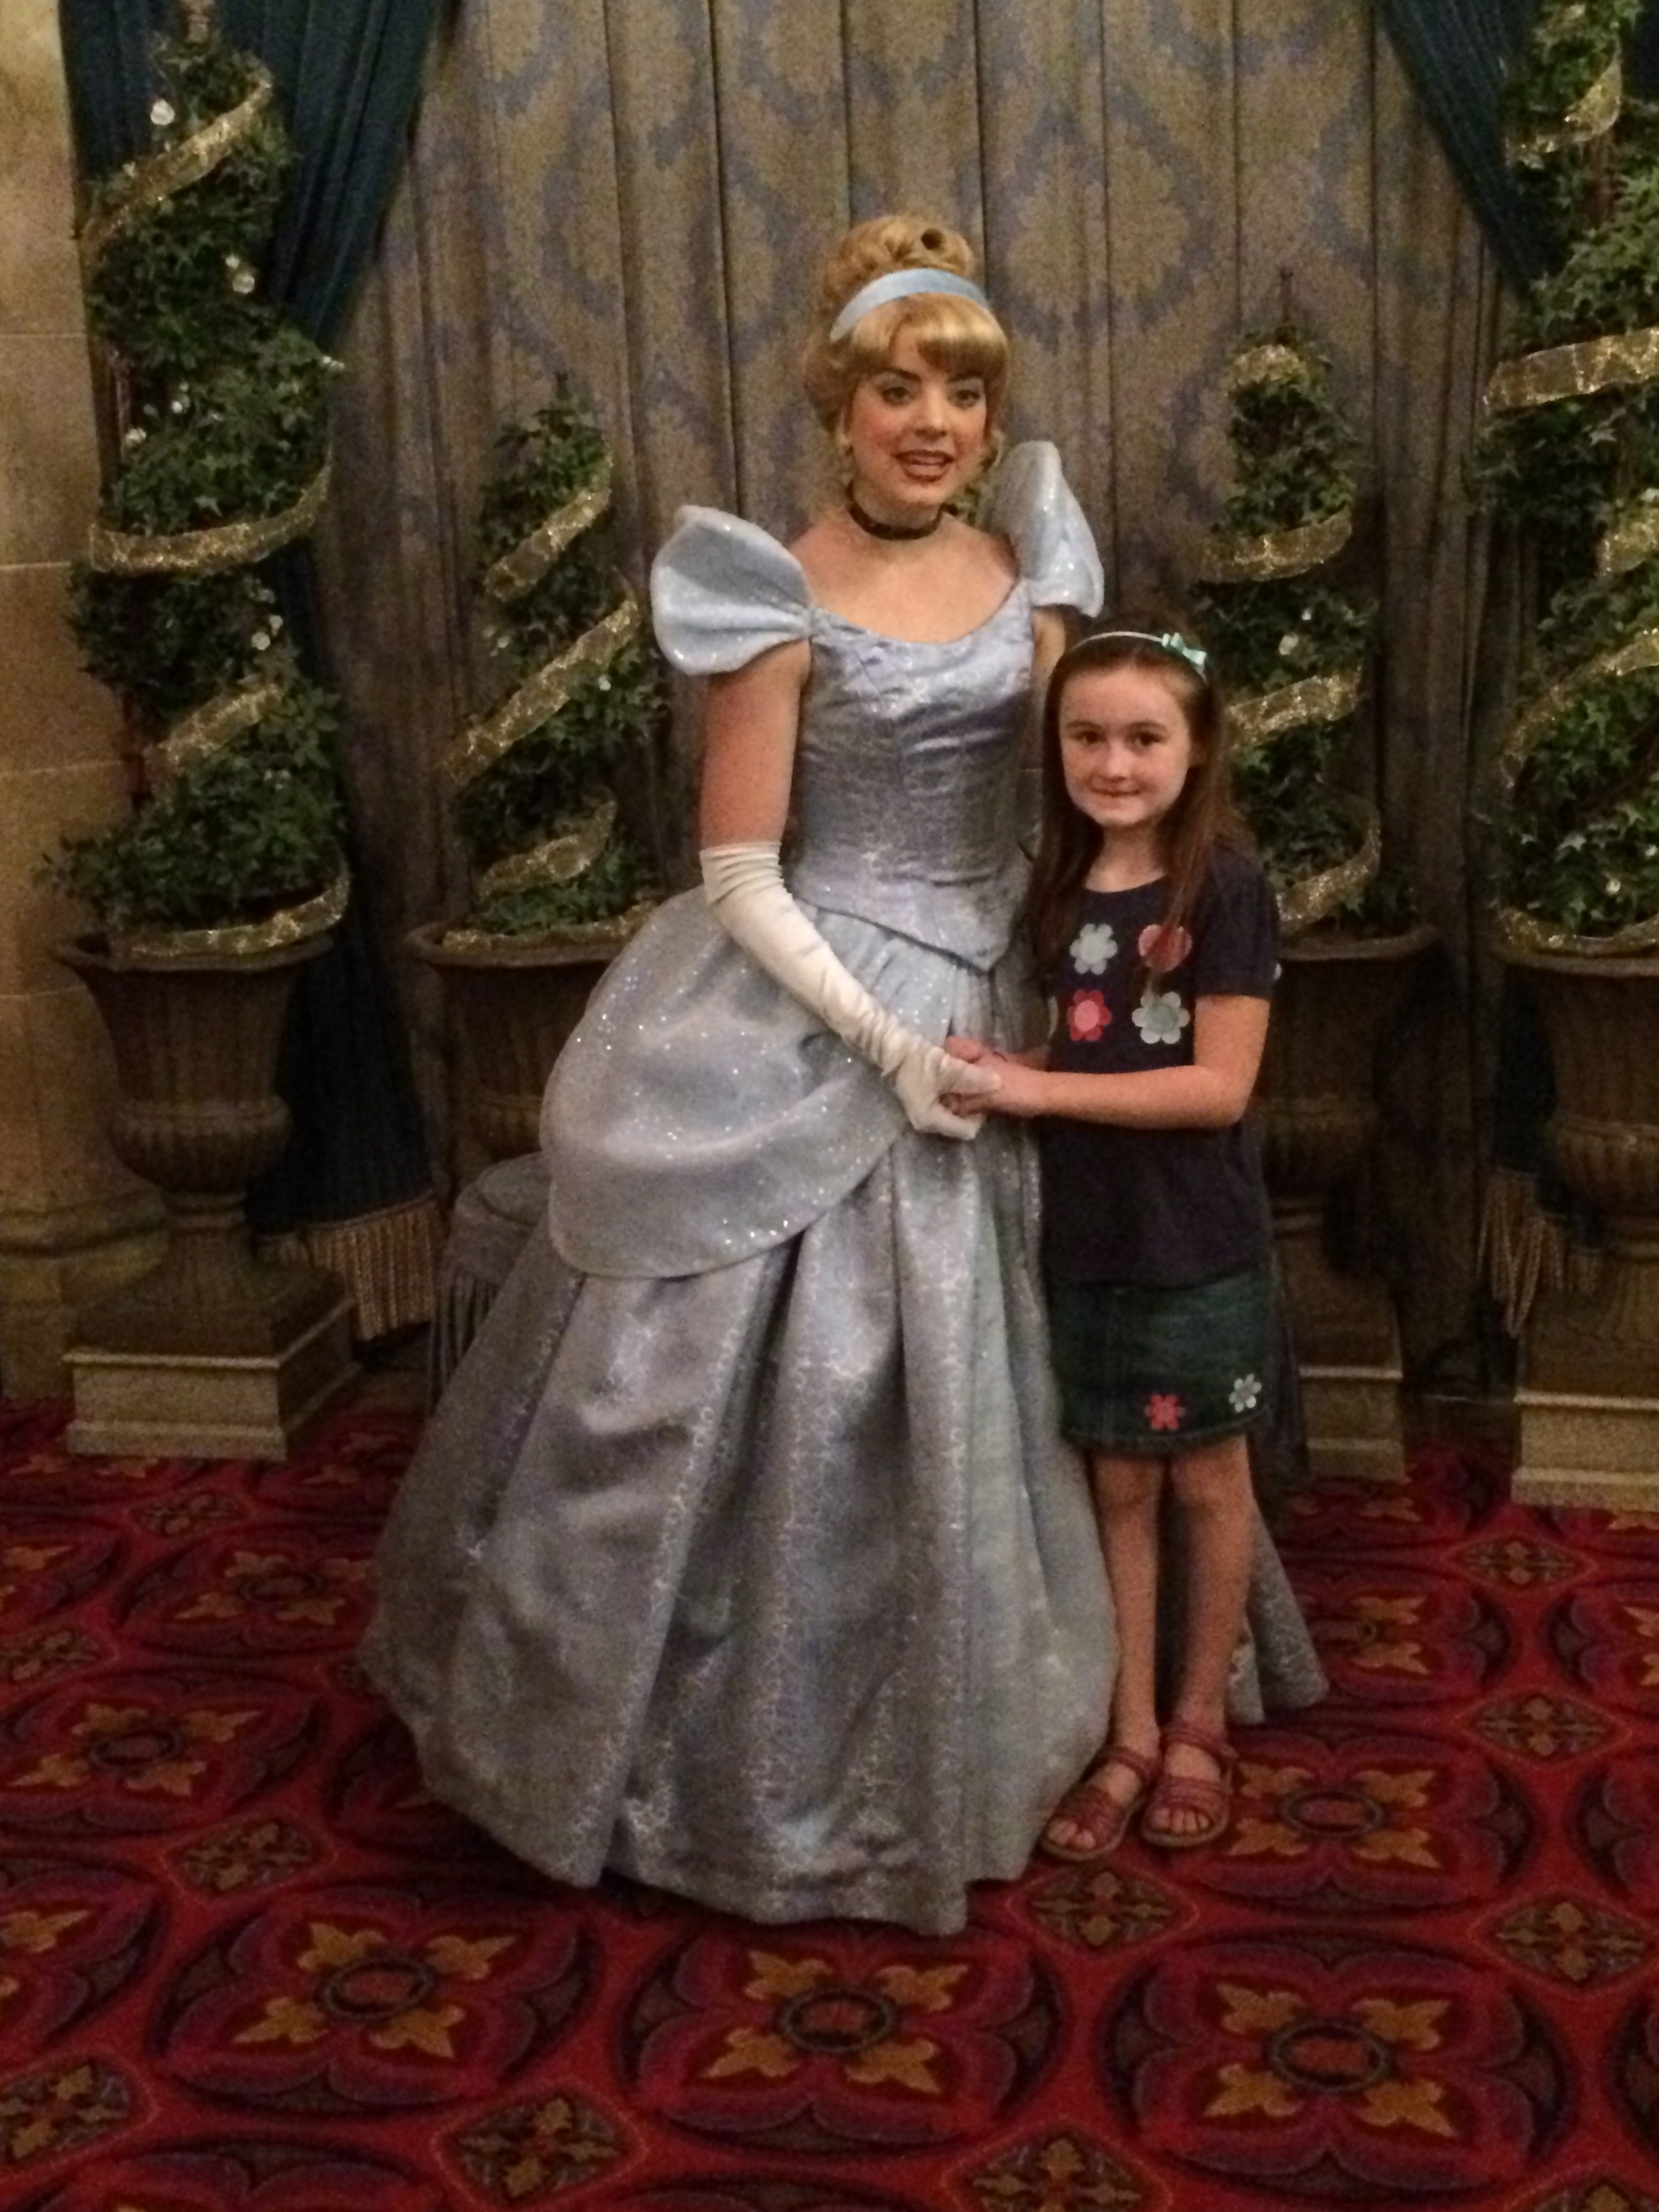 Dining Review: Lunch At Cinderella’s Royal Table At Disney World